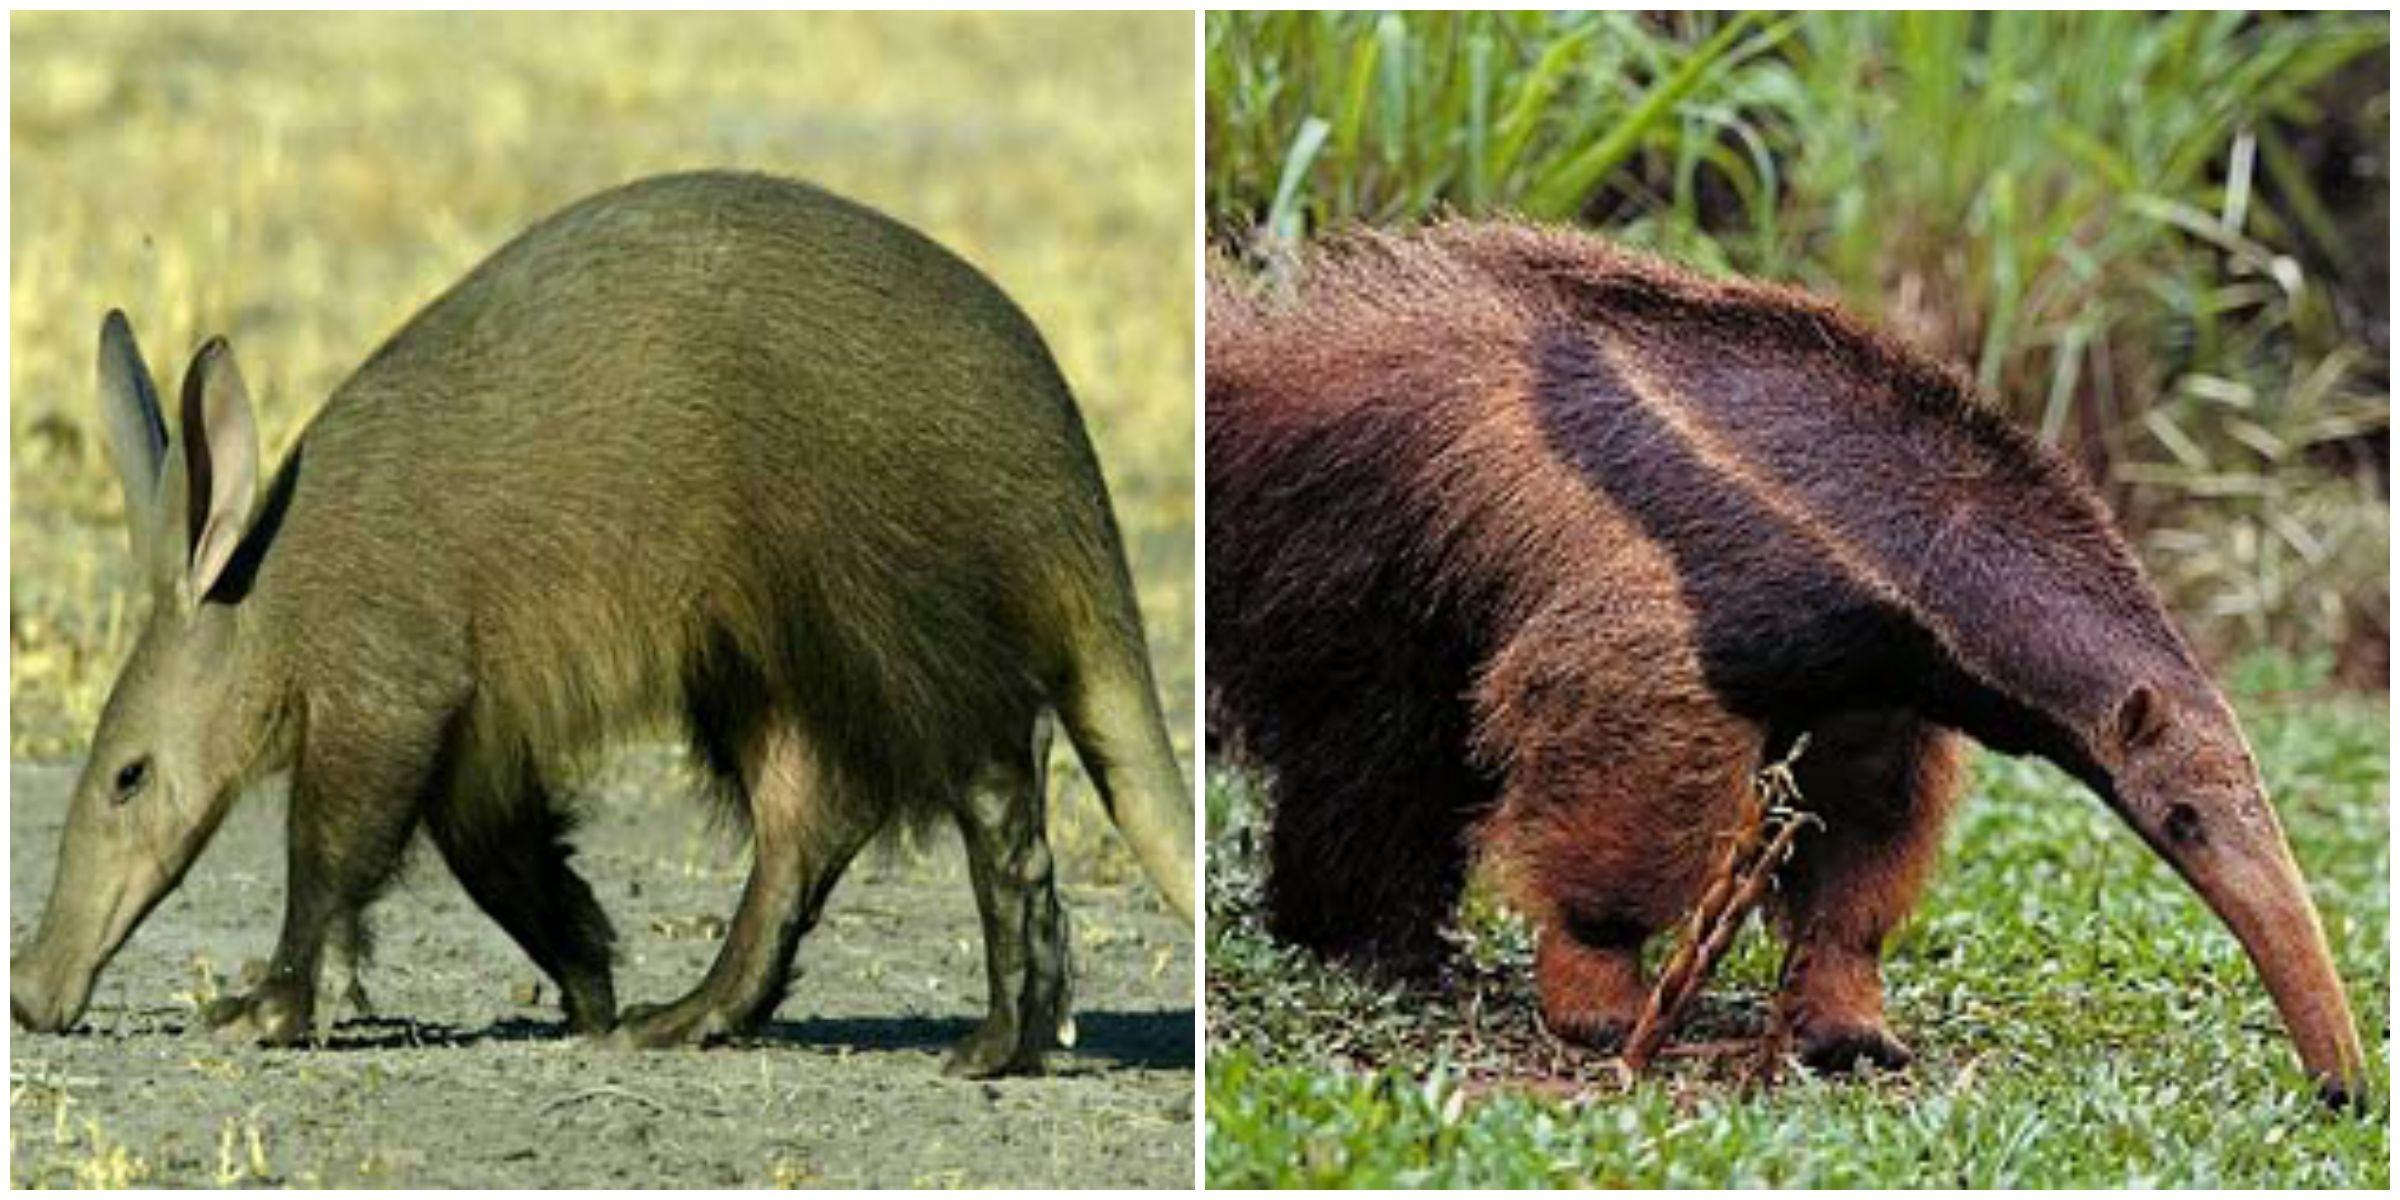 What’s the difference between aardvarks and anteaters? – THE TALON